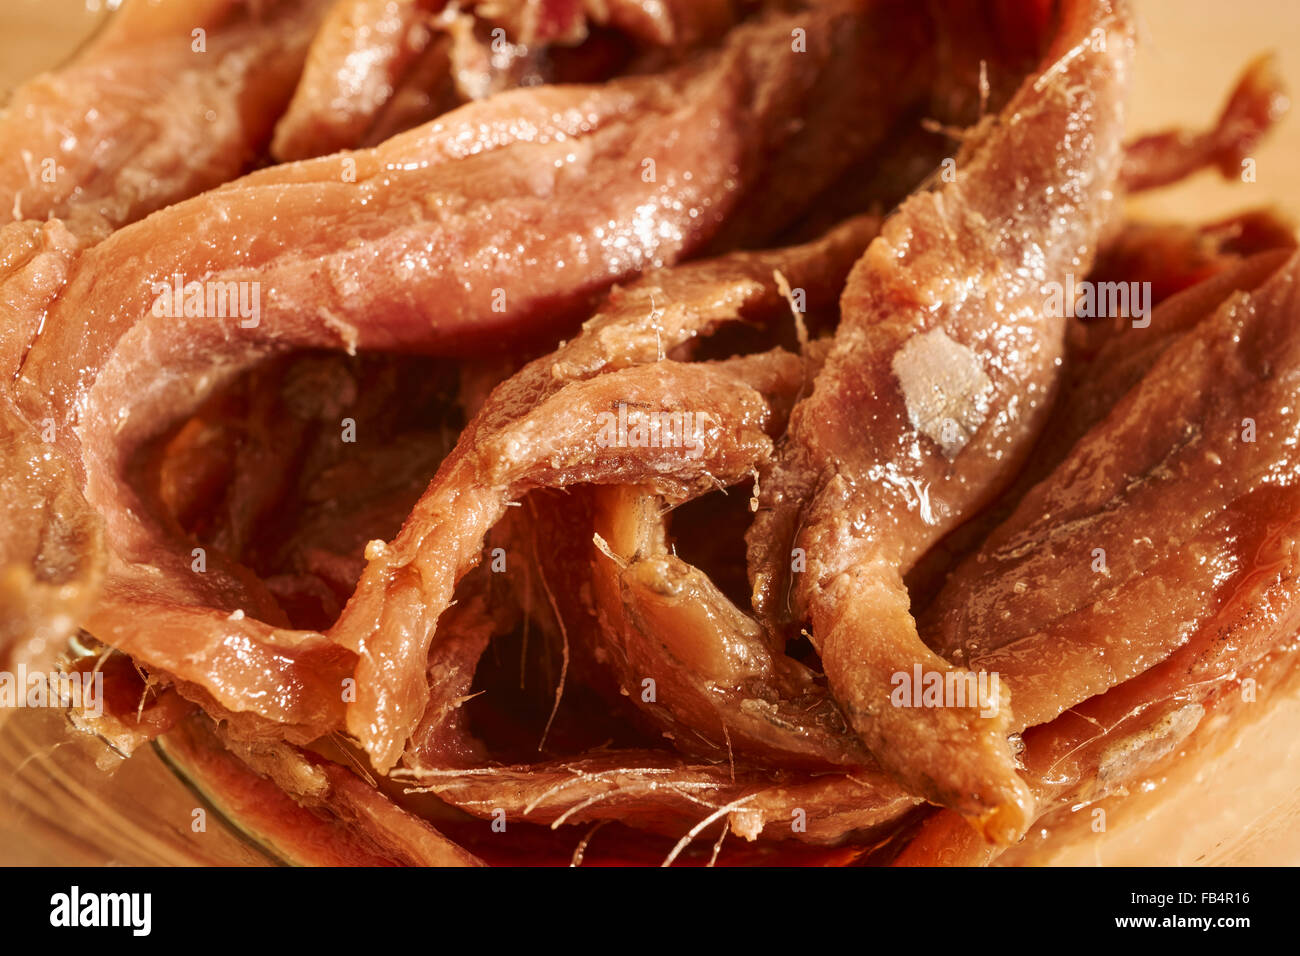 whole anchovy fillets Stock Photo